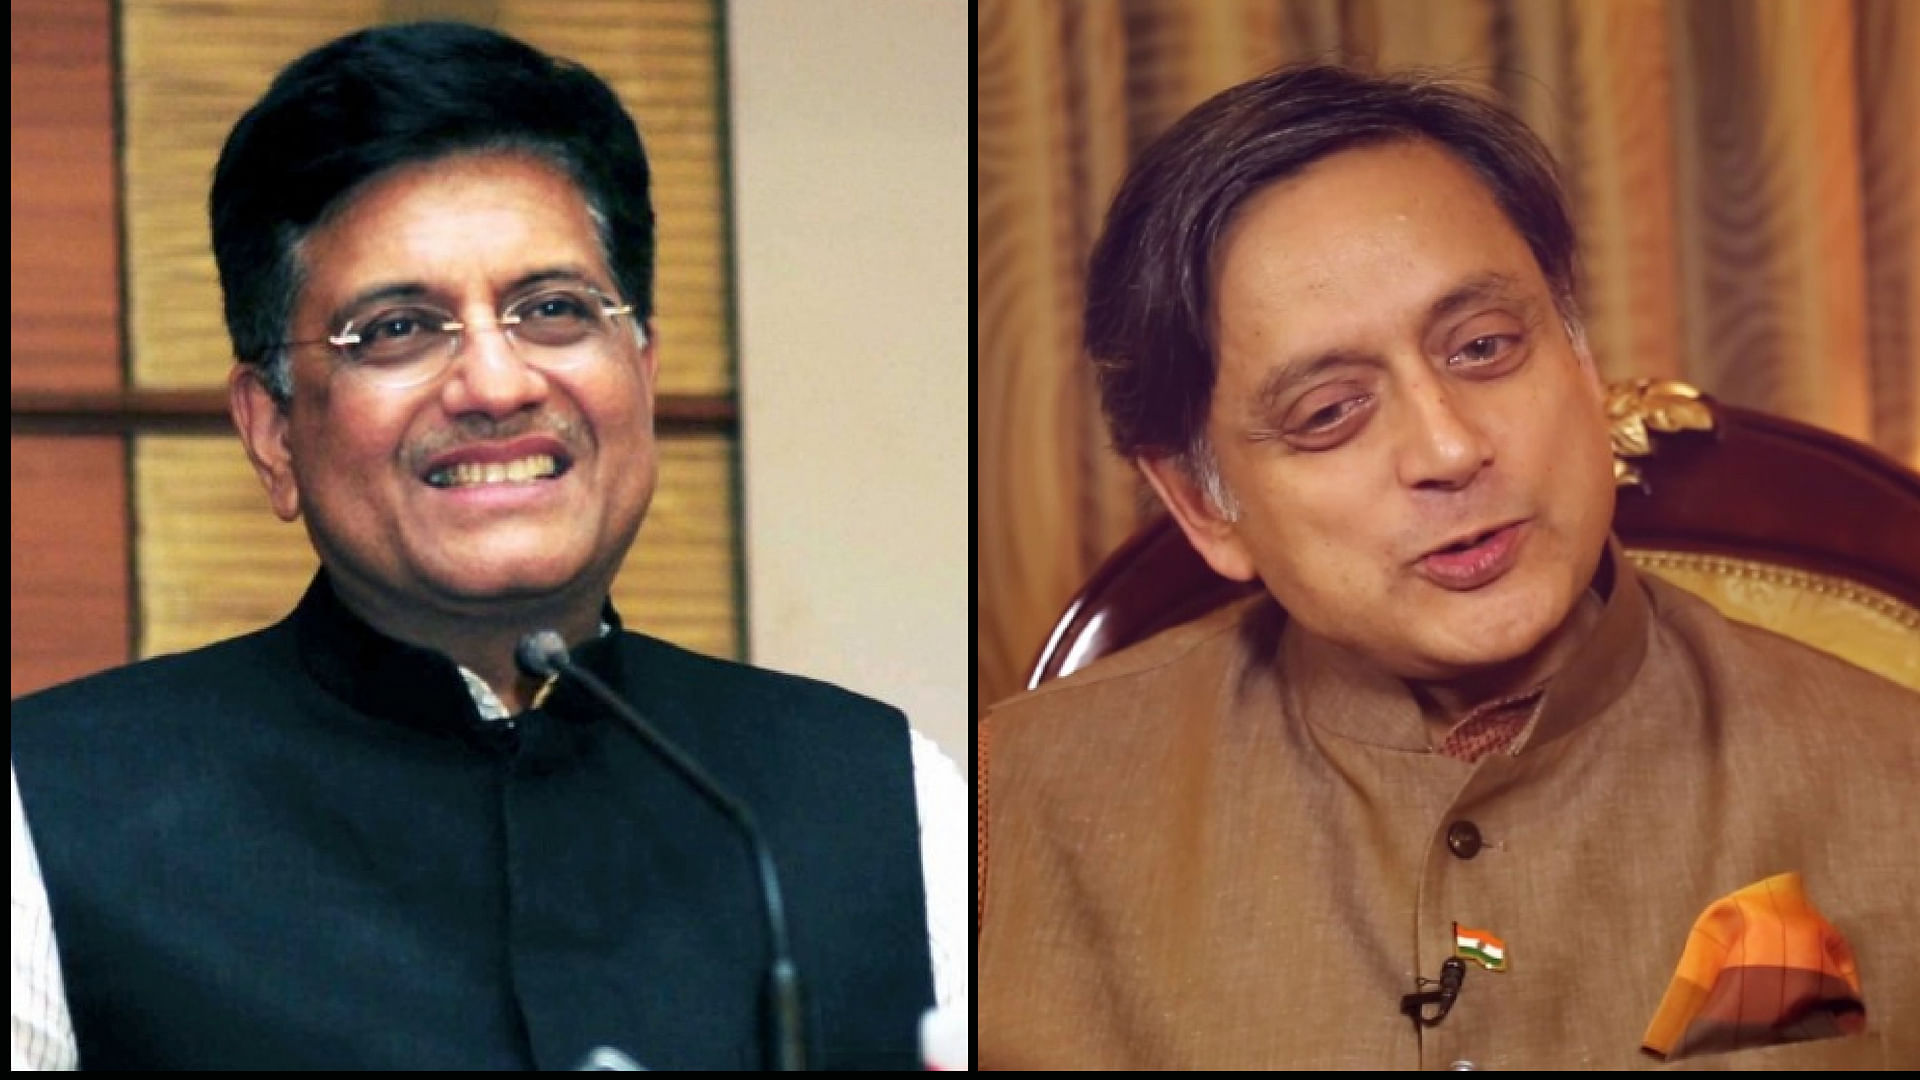 Here is how Shashi Tharoor responded to Piyush Goyal’s foreign accent jibe.